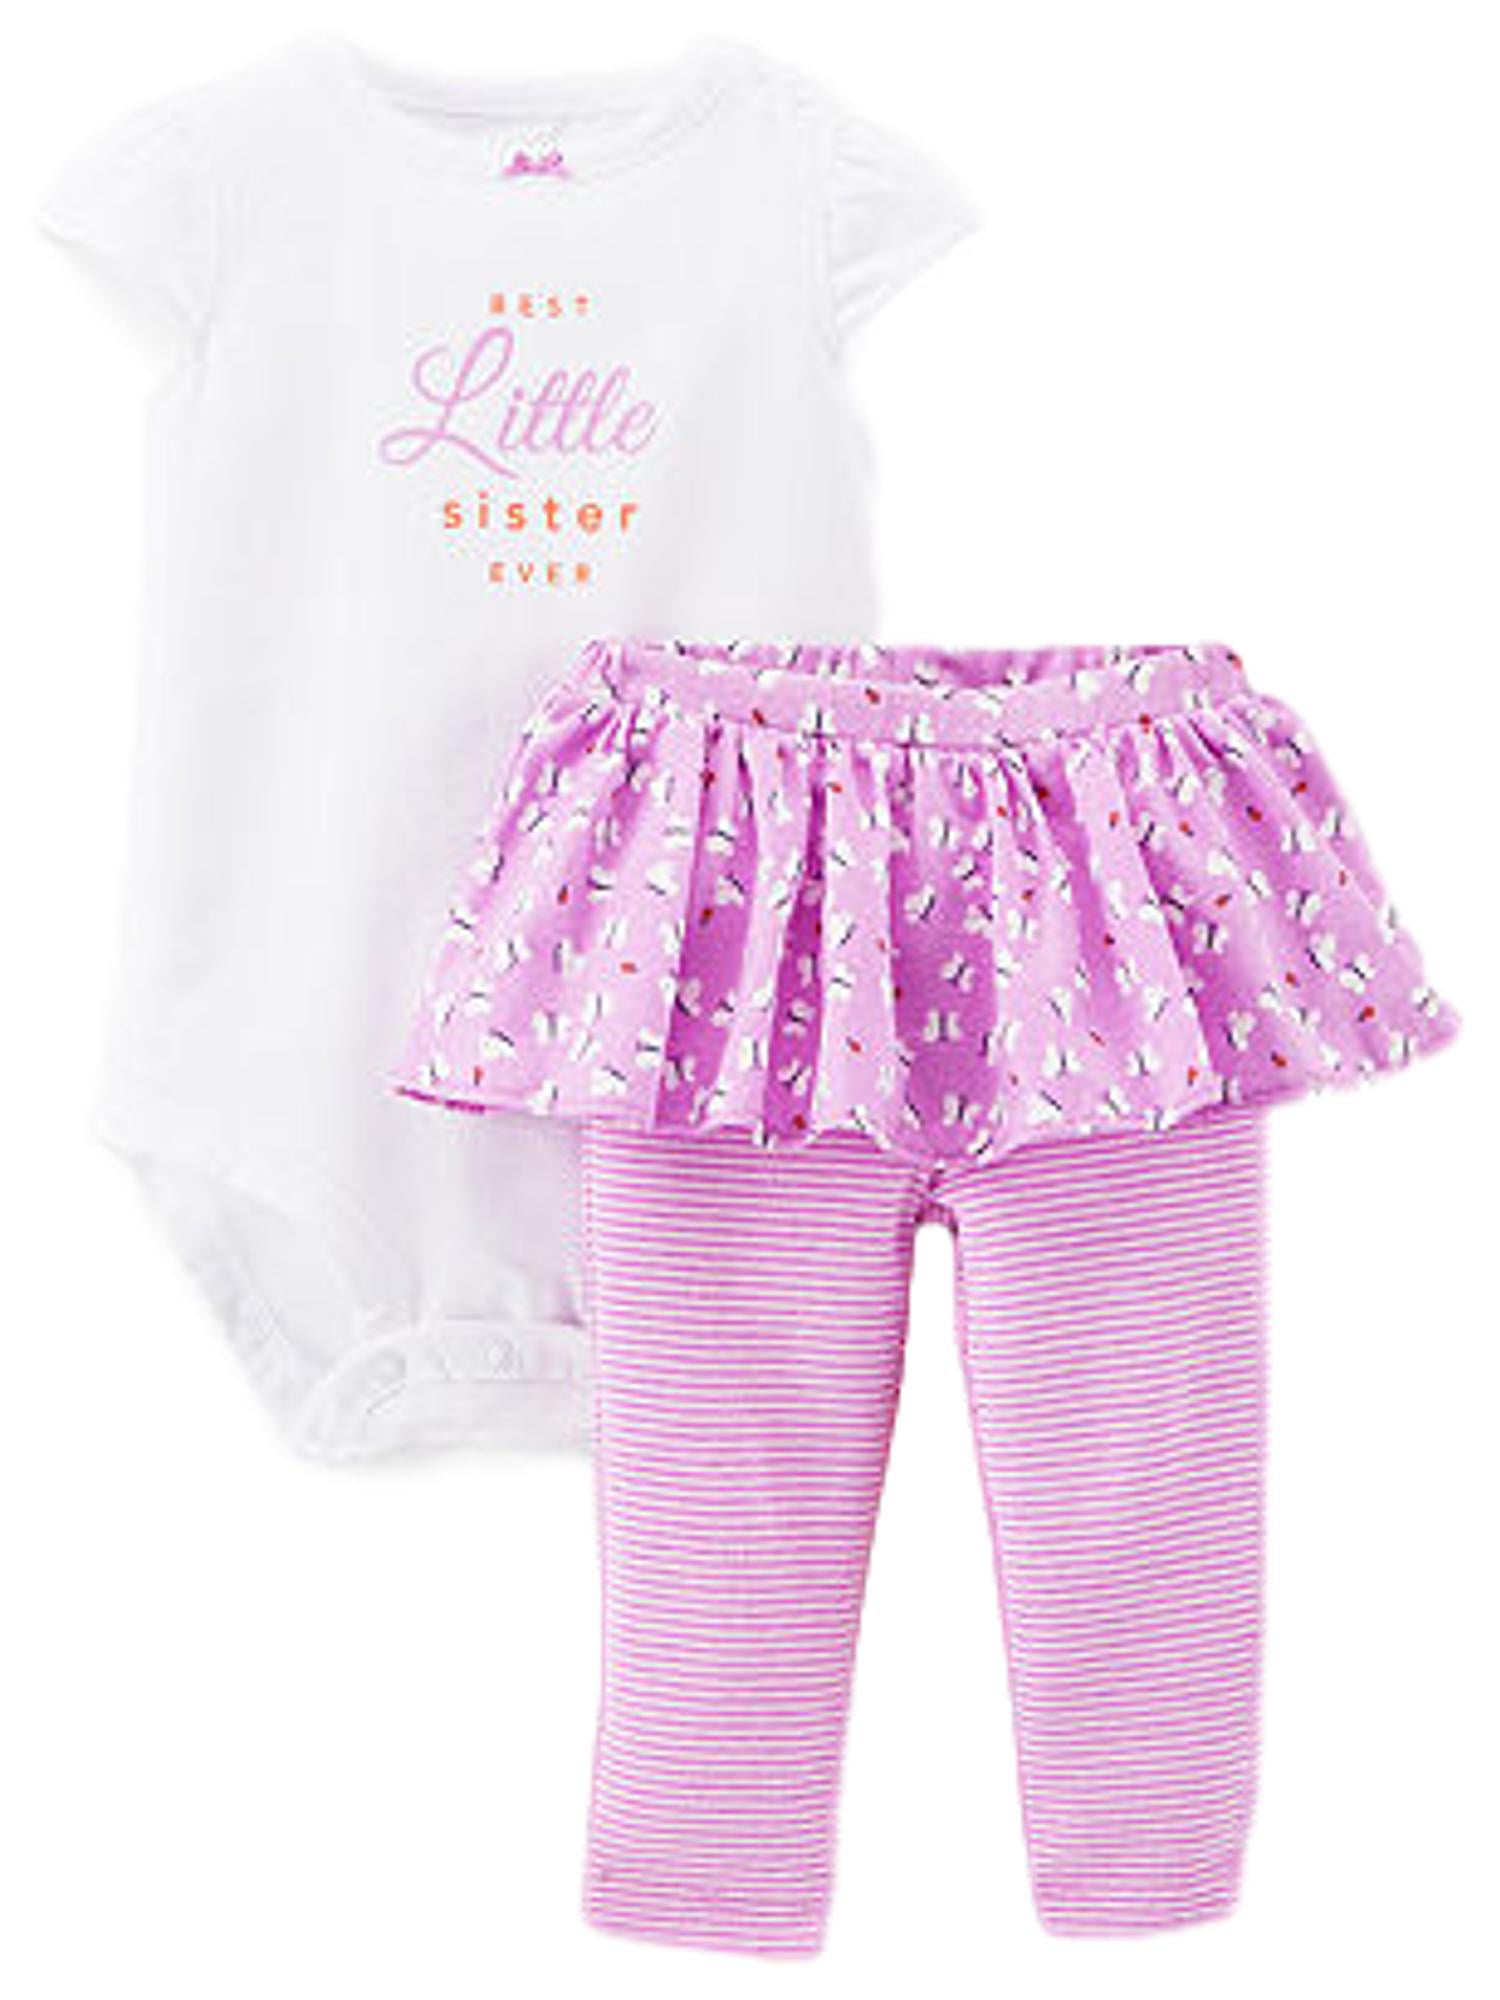 New Carter's Girls 2 Piece Outfit Top & Pants Set NB 3m 6 9 12 Little Sister 